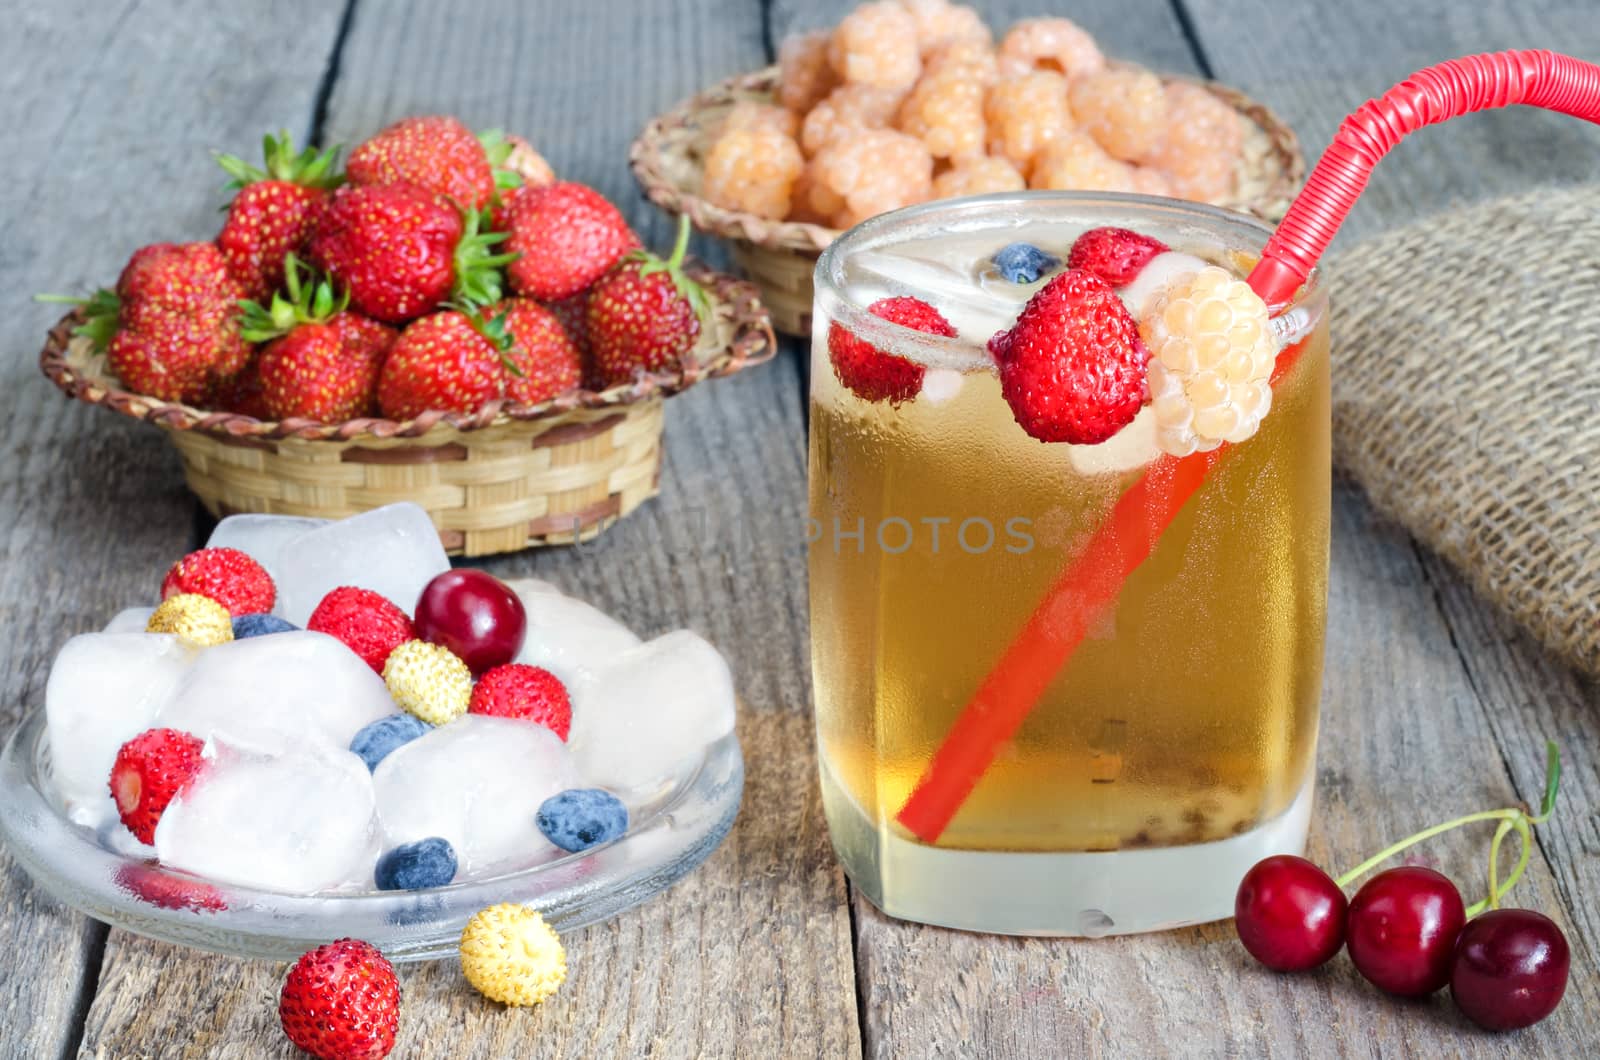 Iced tea and berries by Gaina